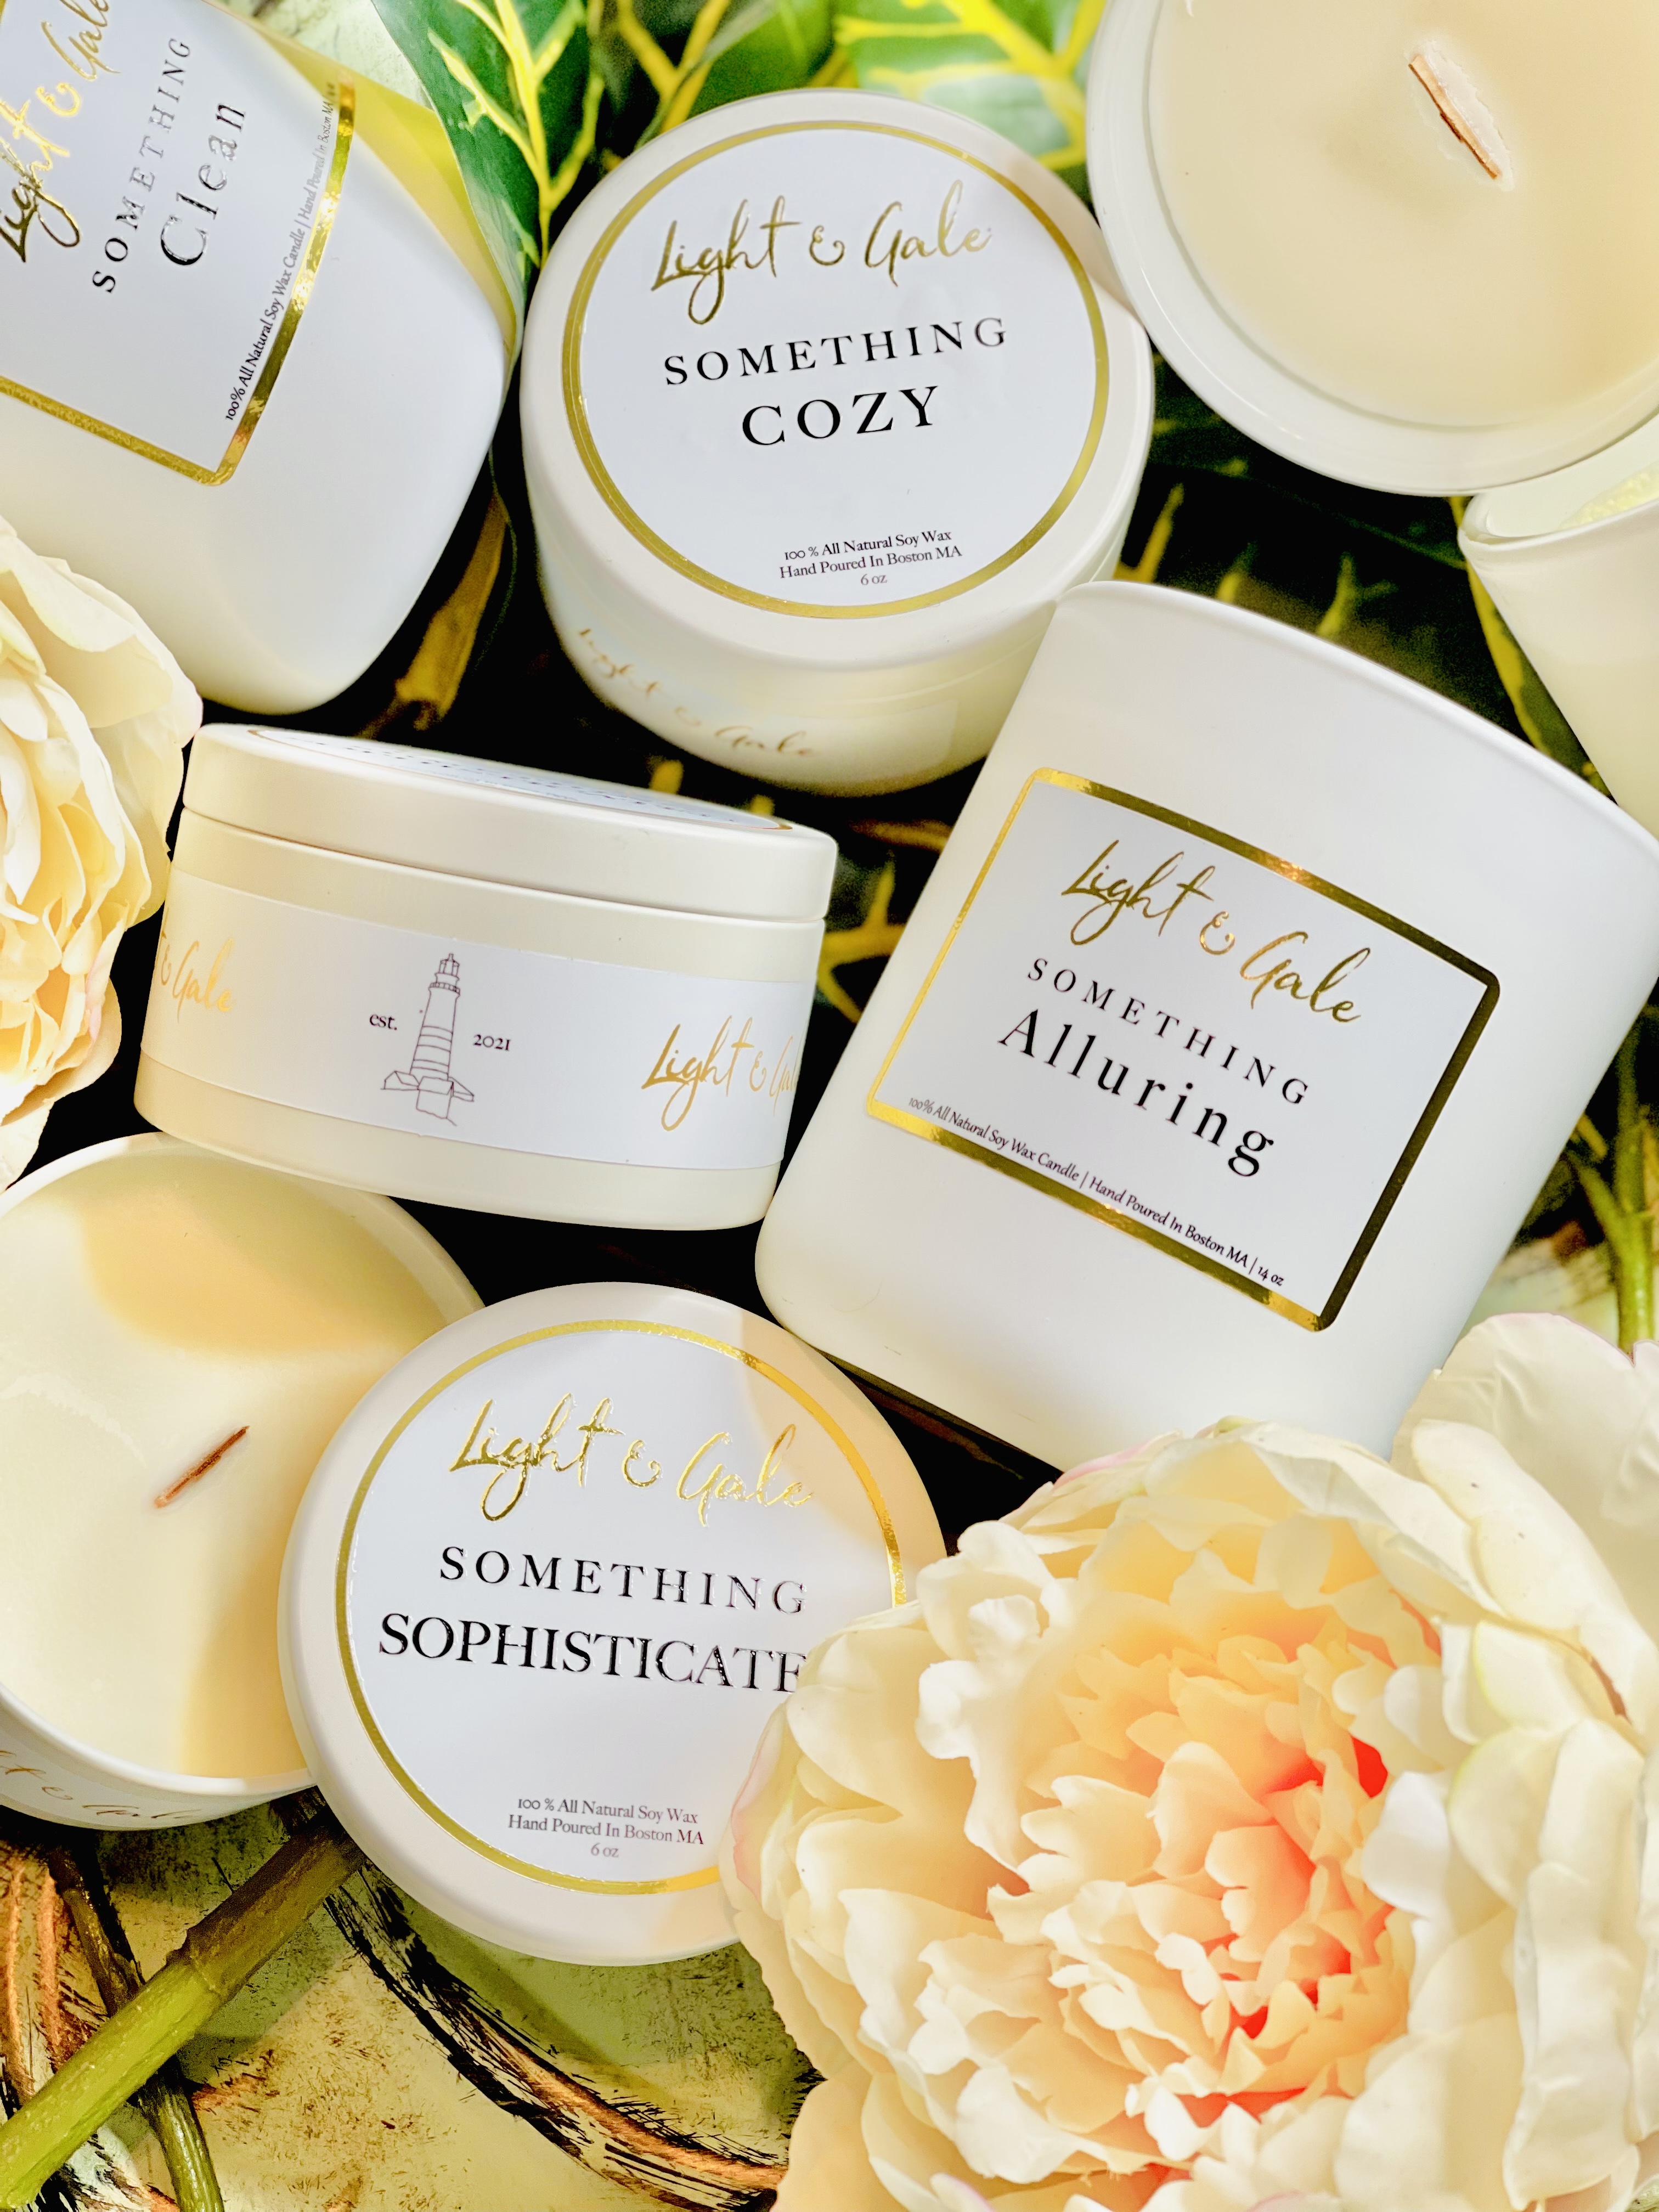 Light & Gale Candle Co